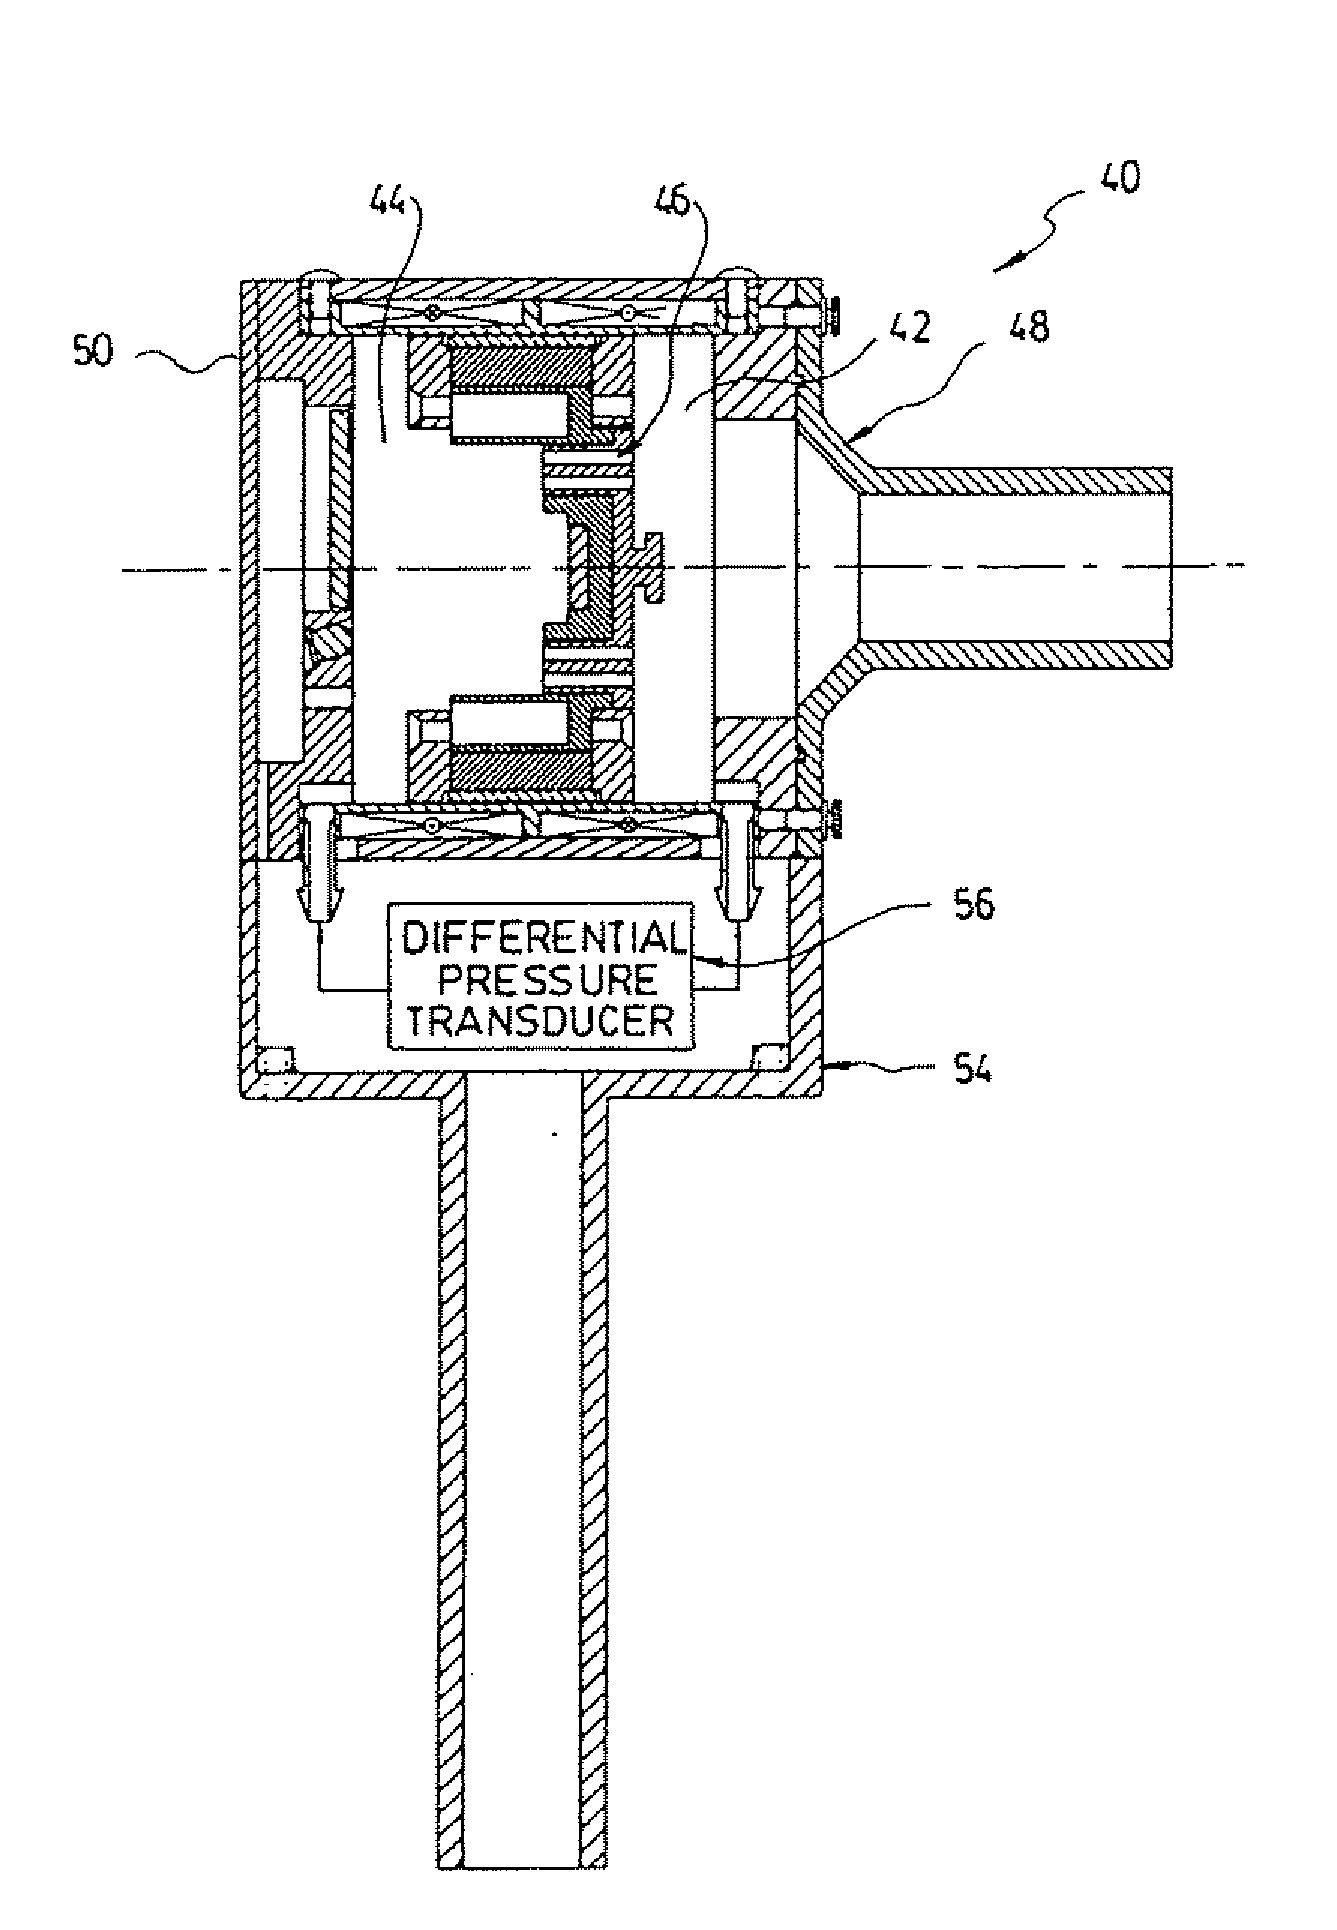 Self-actuated cylinder and oscillation spirometer